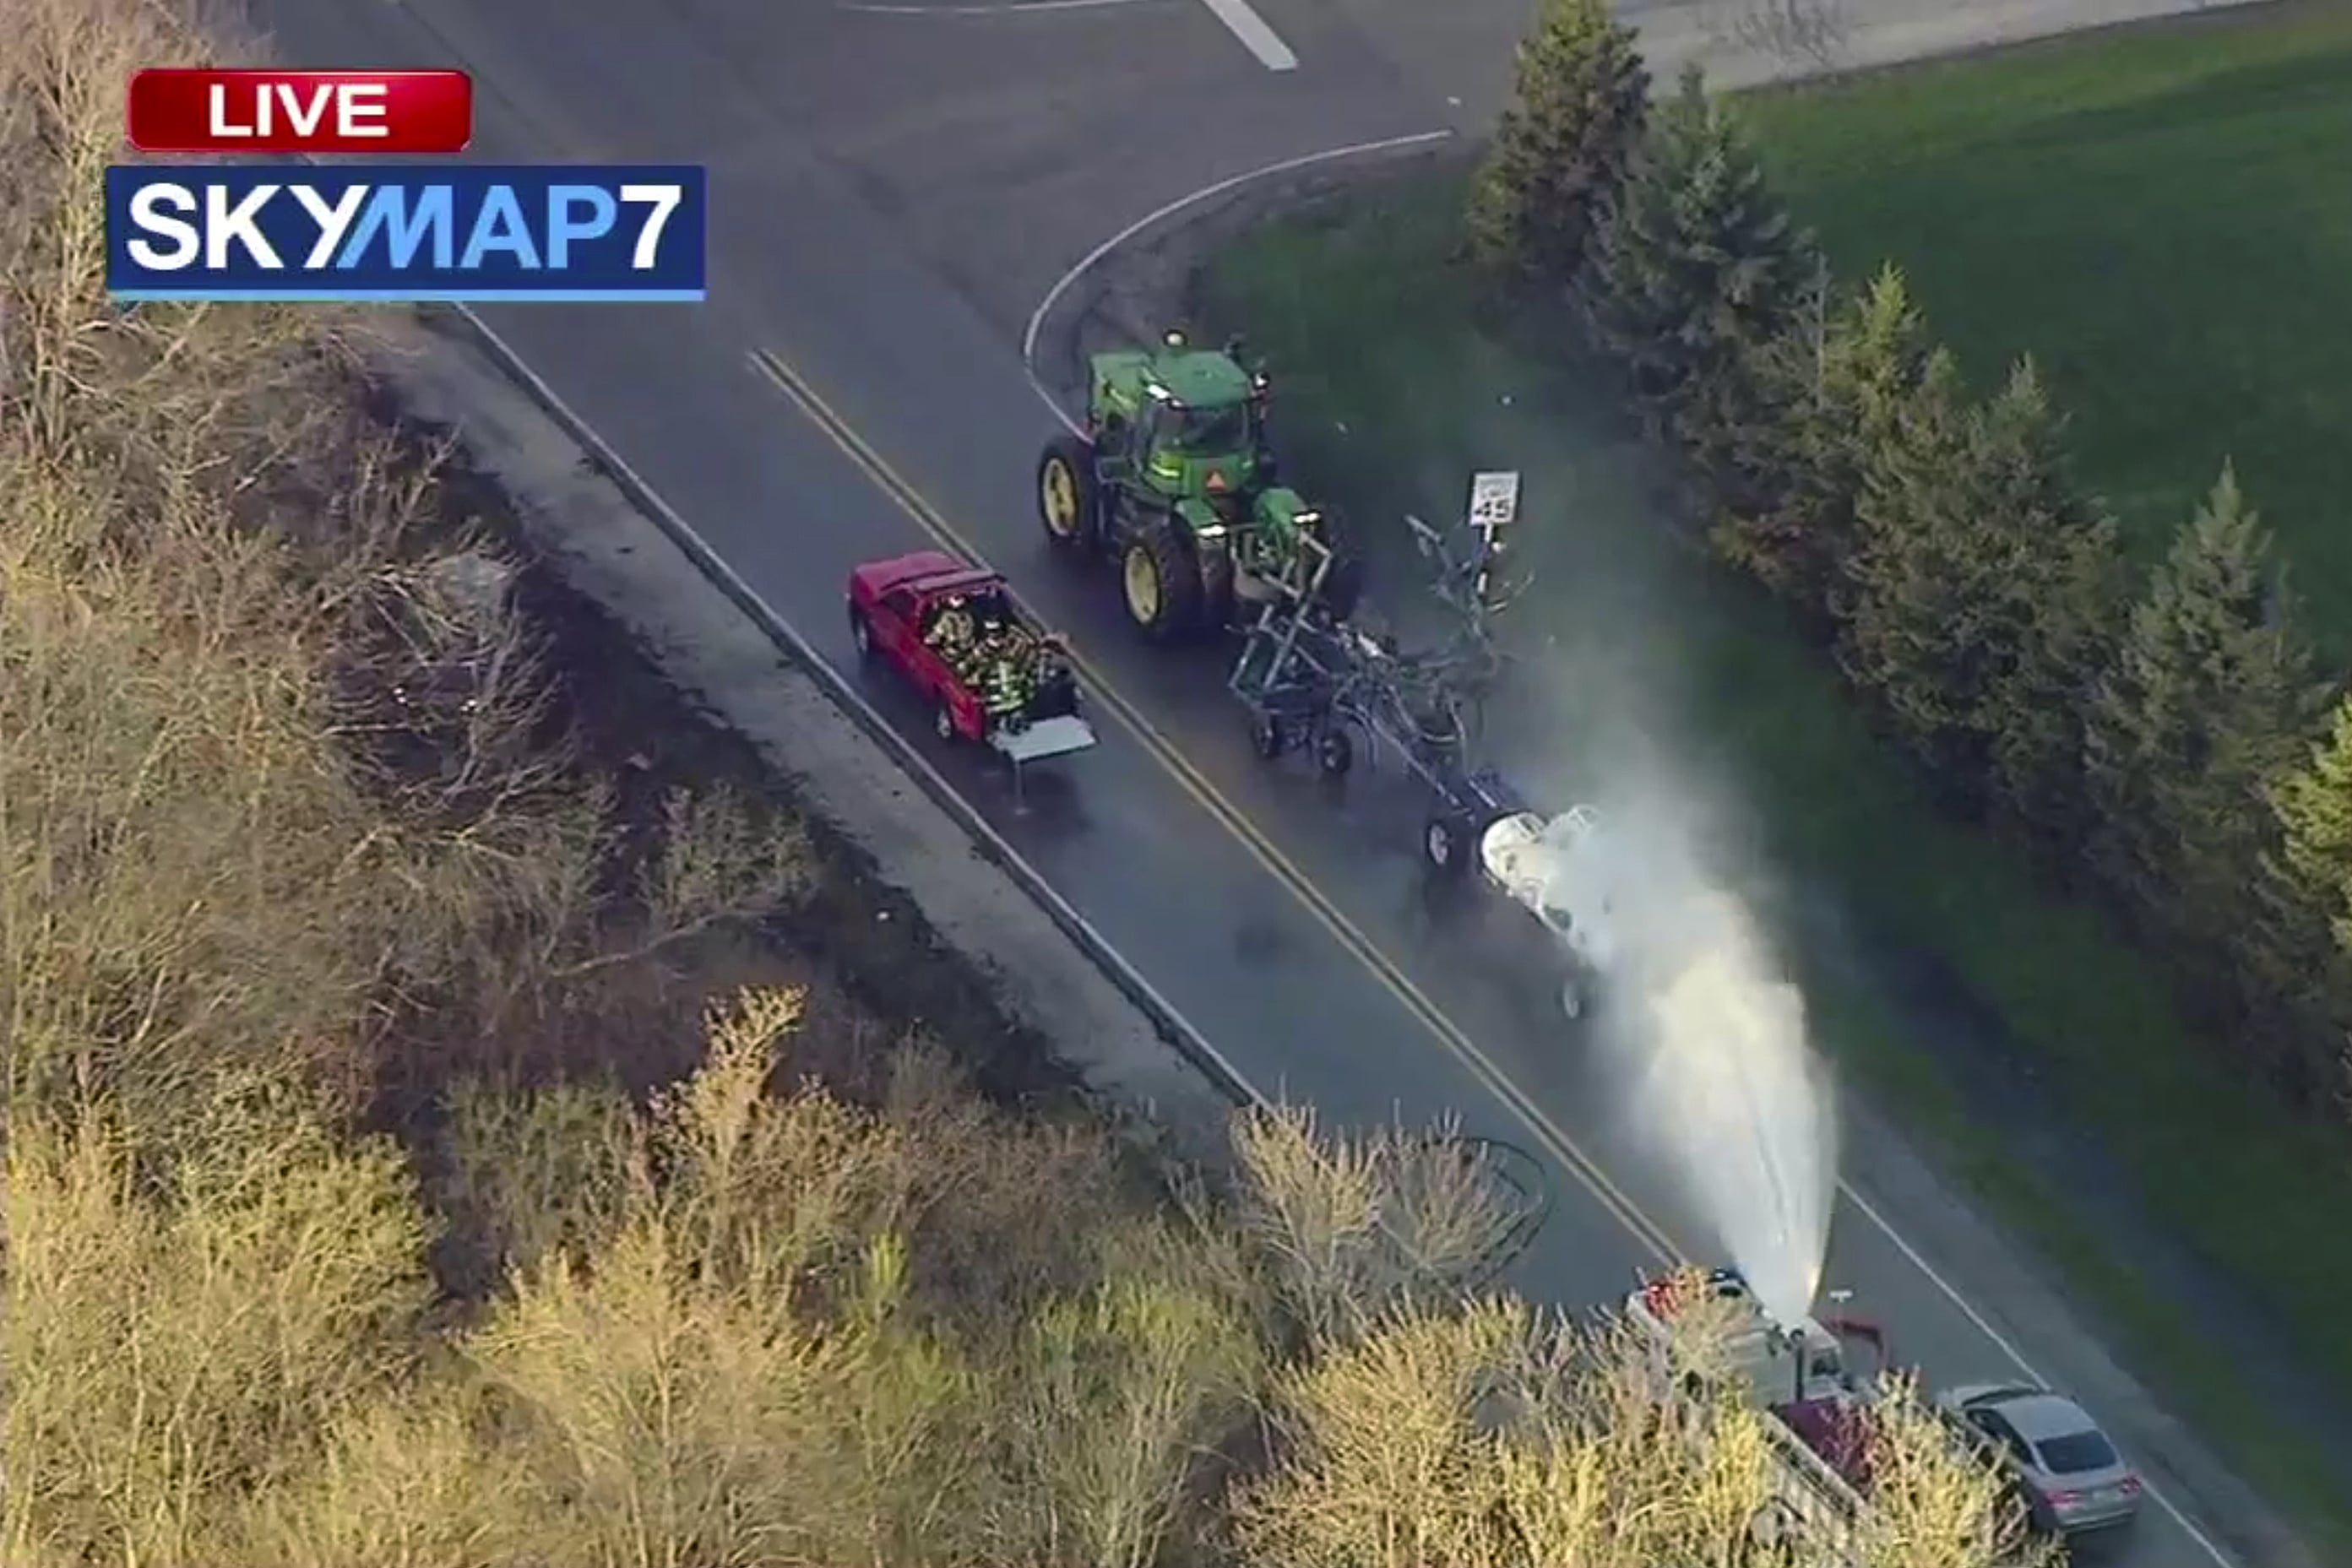 A fire engine sprays water on a container of the chemical that farmers use for soil after after anhydrous ammonia leaked Thursday, April 25, 2019, in Beach Park, Ill. Authorities say dozens of people have been taken to hospitals after anhydrous ammonia leaked from containers that a tractor was pulling in the Chicago suburb.